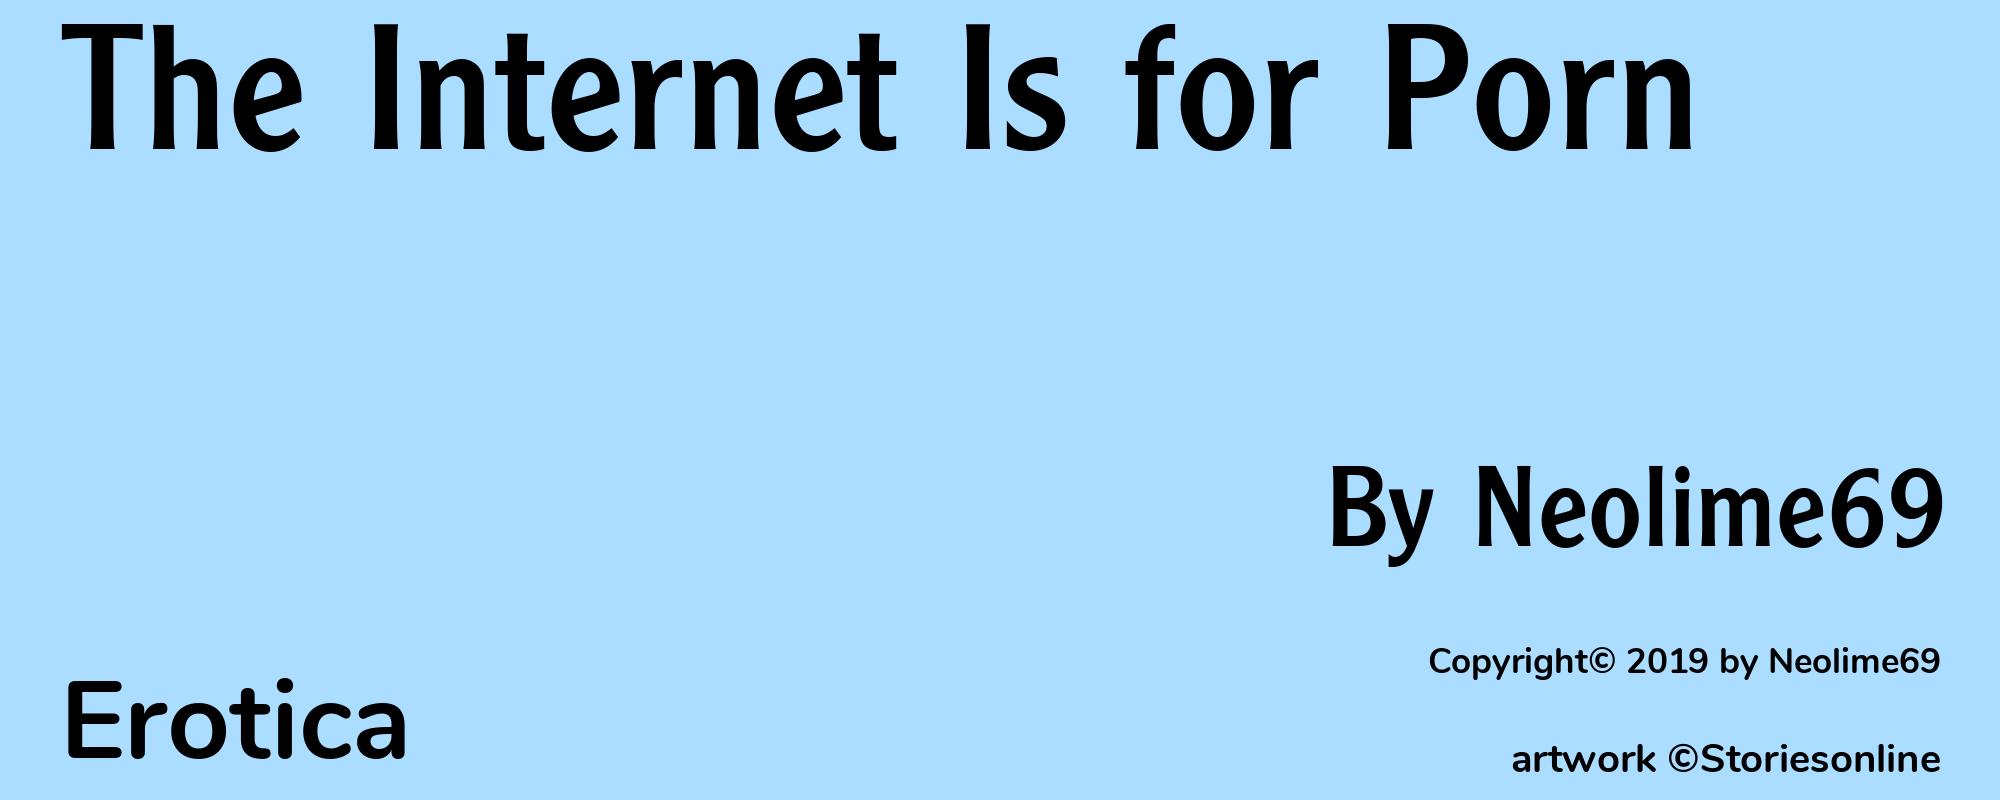 The Internet Is for Porn - Cover